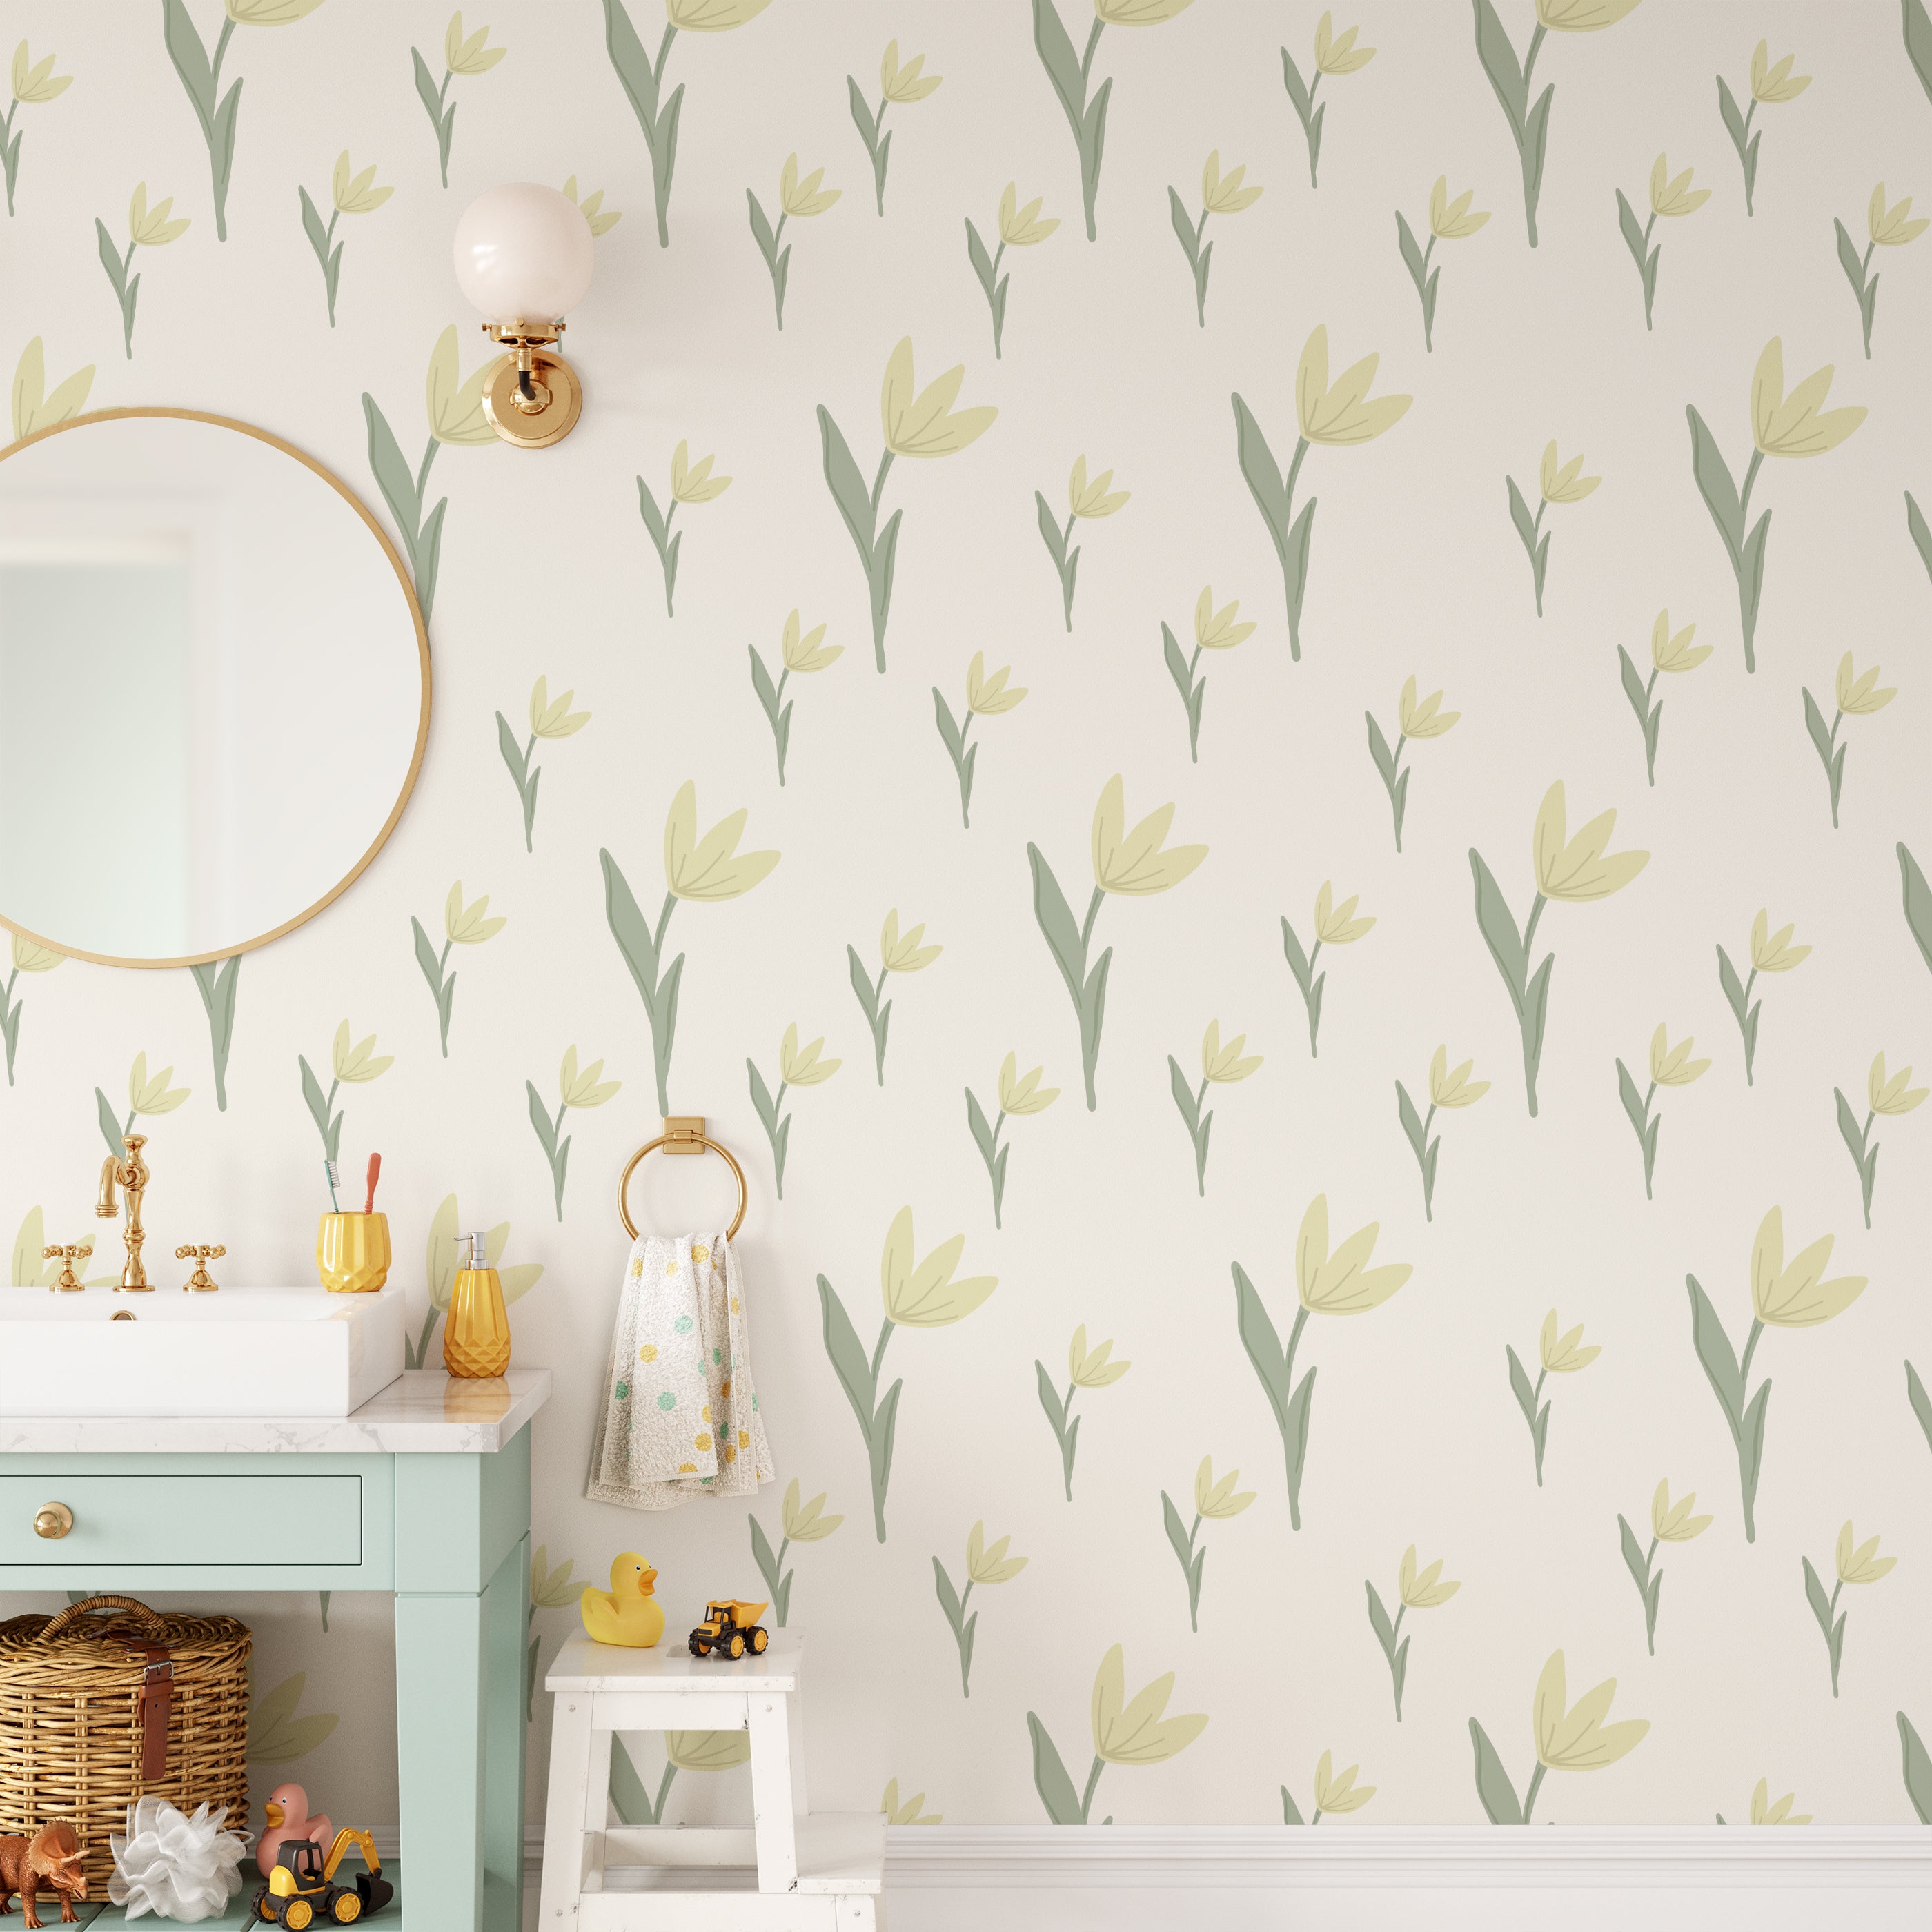 Close-up view of the Bright Garden Flowers Wallpaper, highlighting its simple yet elegant design of yellow tulips with green leaves on a soft cream background. The pattern is evenly spaced, giving a clean and organized look that brings a natural and calm feeling to any room.